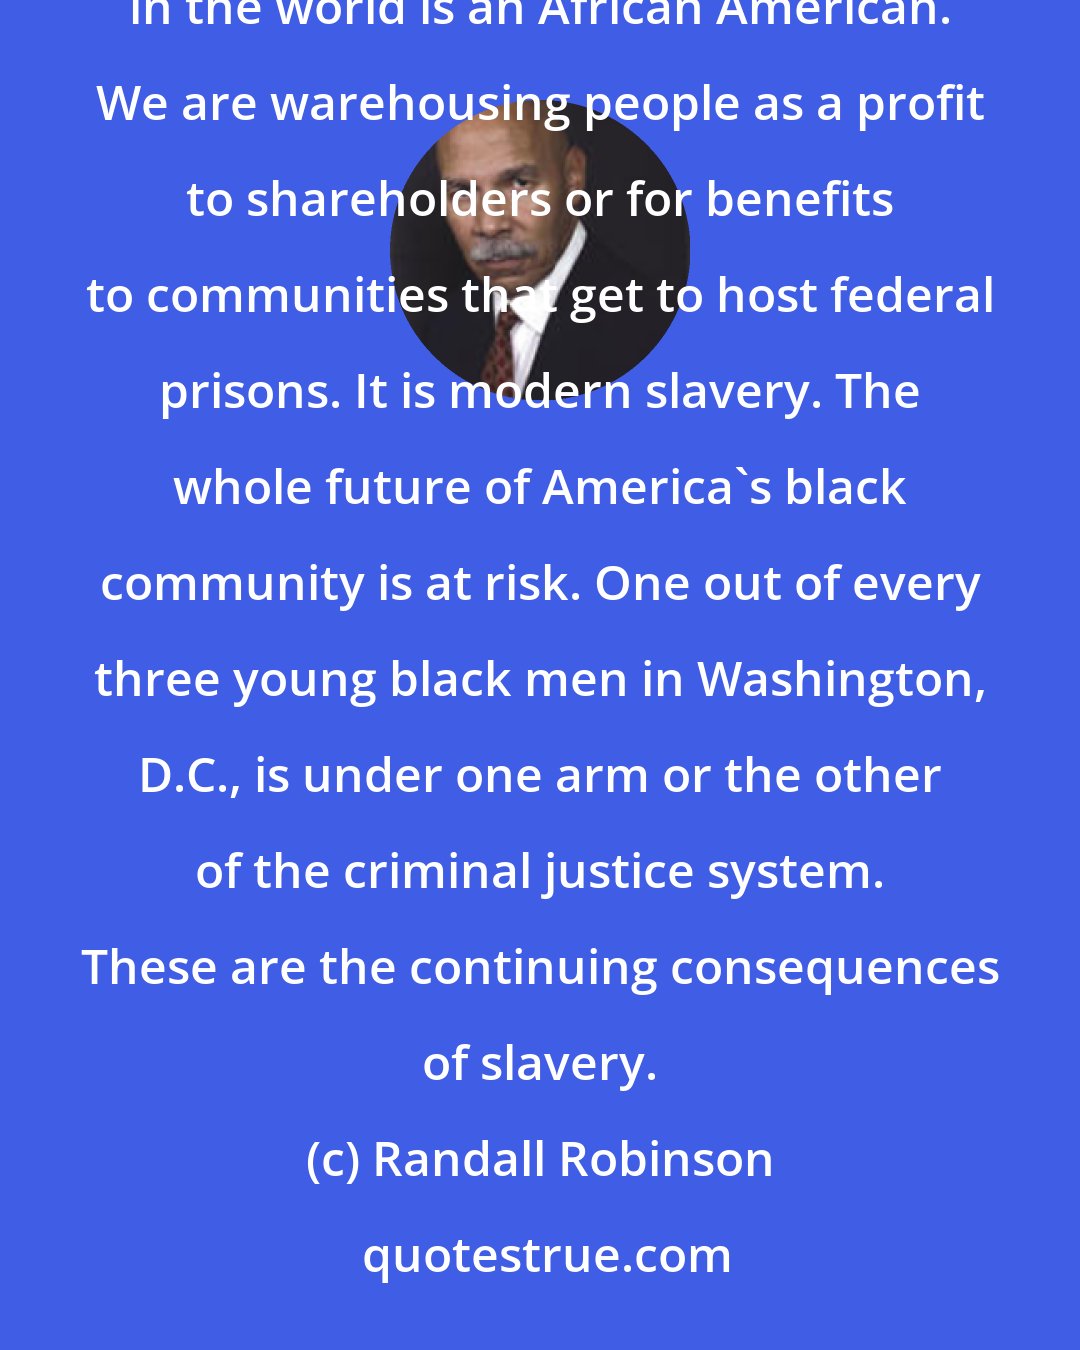 Randall Robinson: The U.S. has the largest prison population in the world: two million people. One out of every eight prisoners in the world is an African American. We are warehousing people as a profit to shareholders or for benefits to communities that get to host federal prisons. It is modern slavery. The whole future of America's black community is at risk. One out of every three young black men in Washington, D.C., is under one arm or the other of the criminal justice system. These are the continuing consequences of slavery.